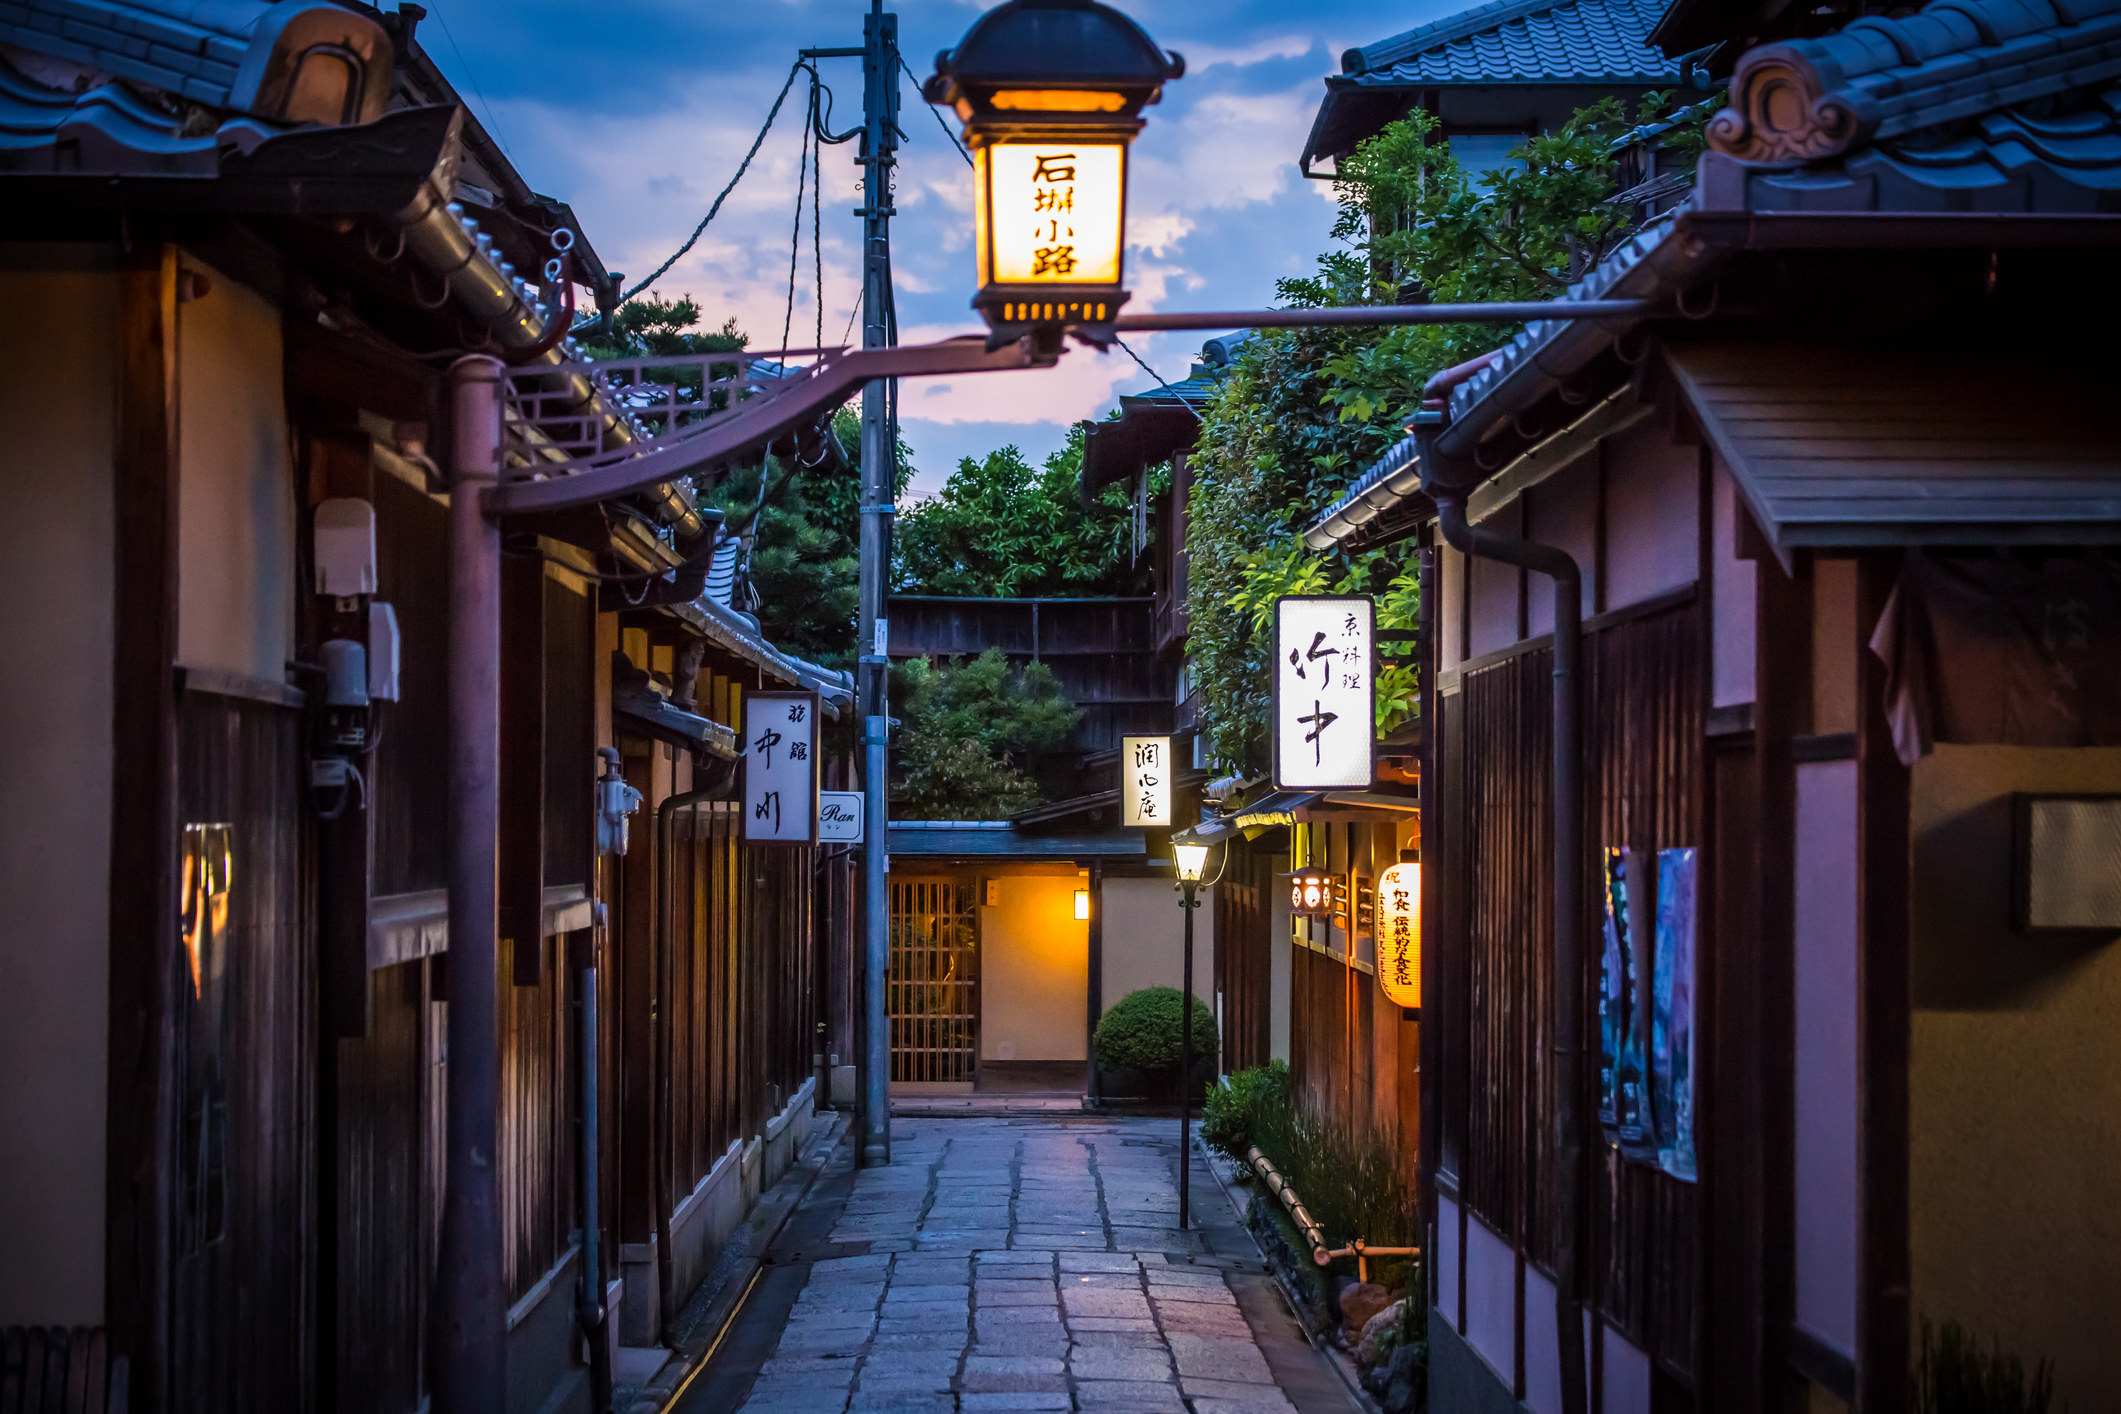 A traditional street of Kyoto.